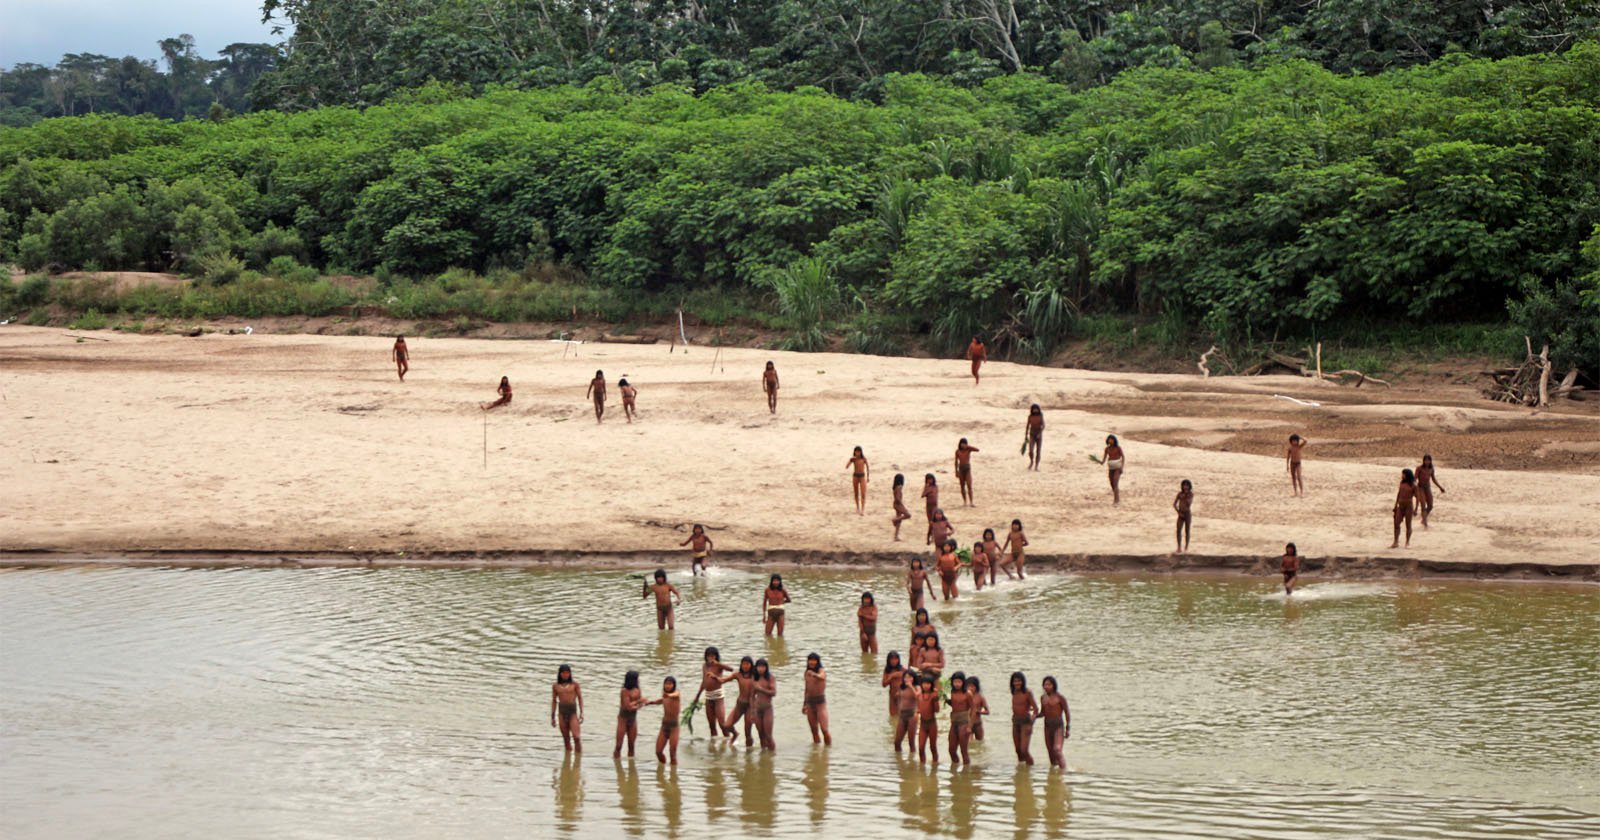 A group of people, likely indigenous, are gathered along a sandy riverbank and wading in shallow water. The background is lush with dense green foliage. Some individuals are in the water, while others are scattered along the shore.